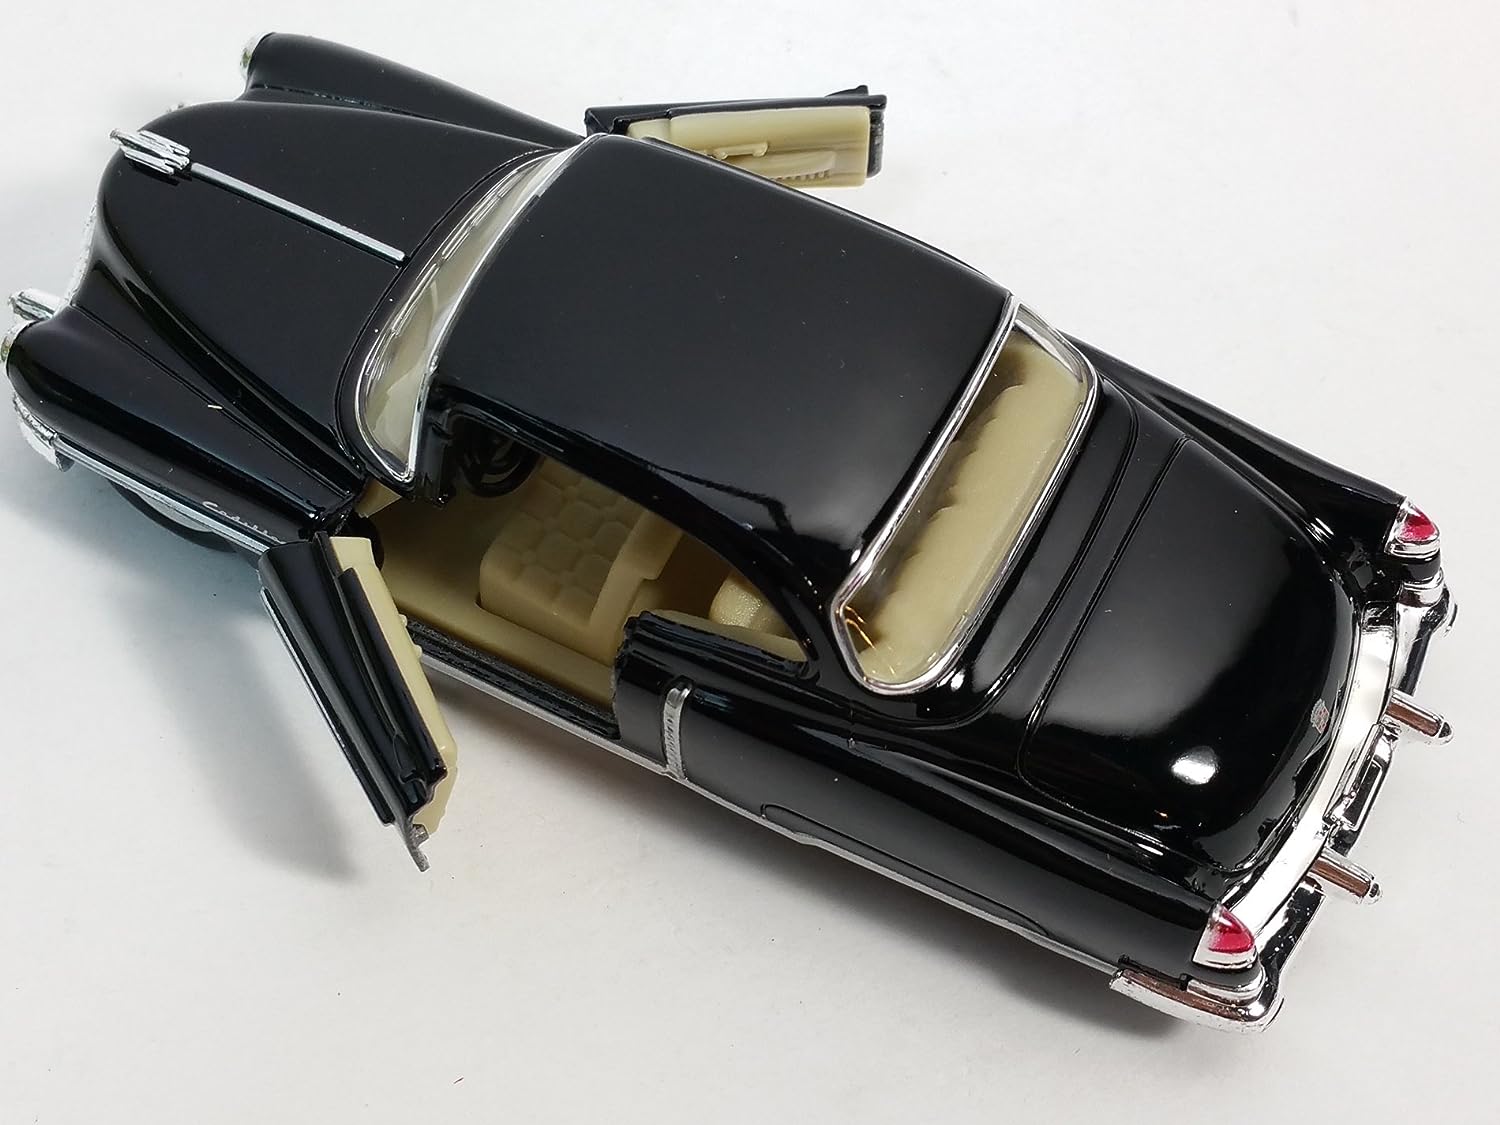 kinsmart 1953 cadillac series 62 black 2 door coupe 143 o scale diecast car review